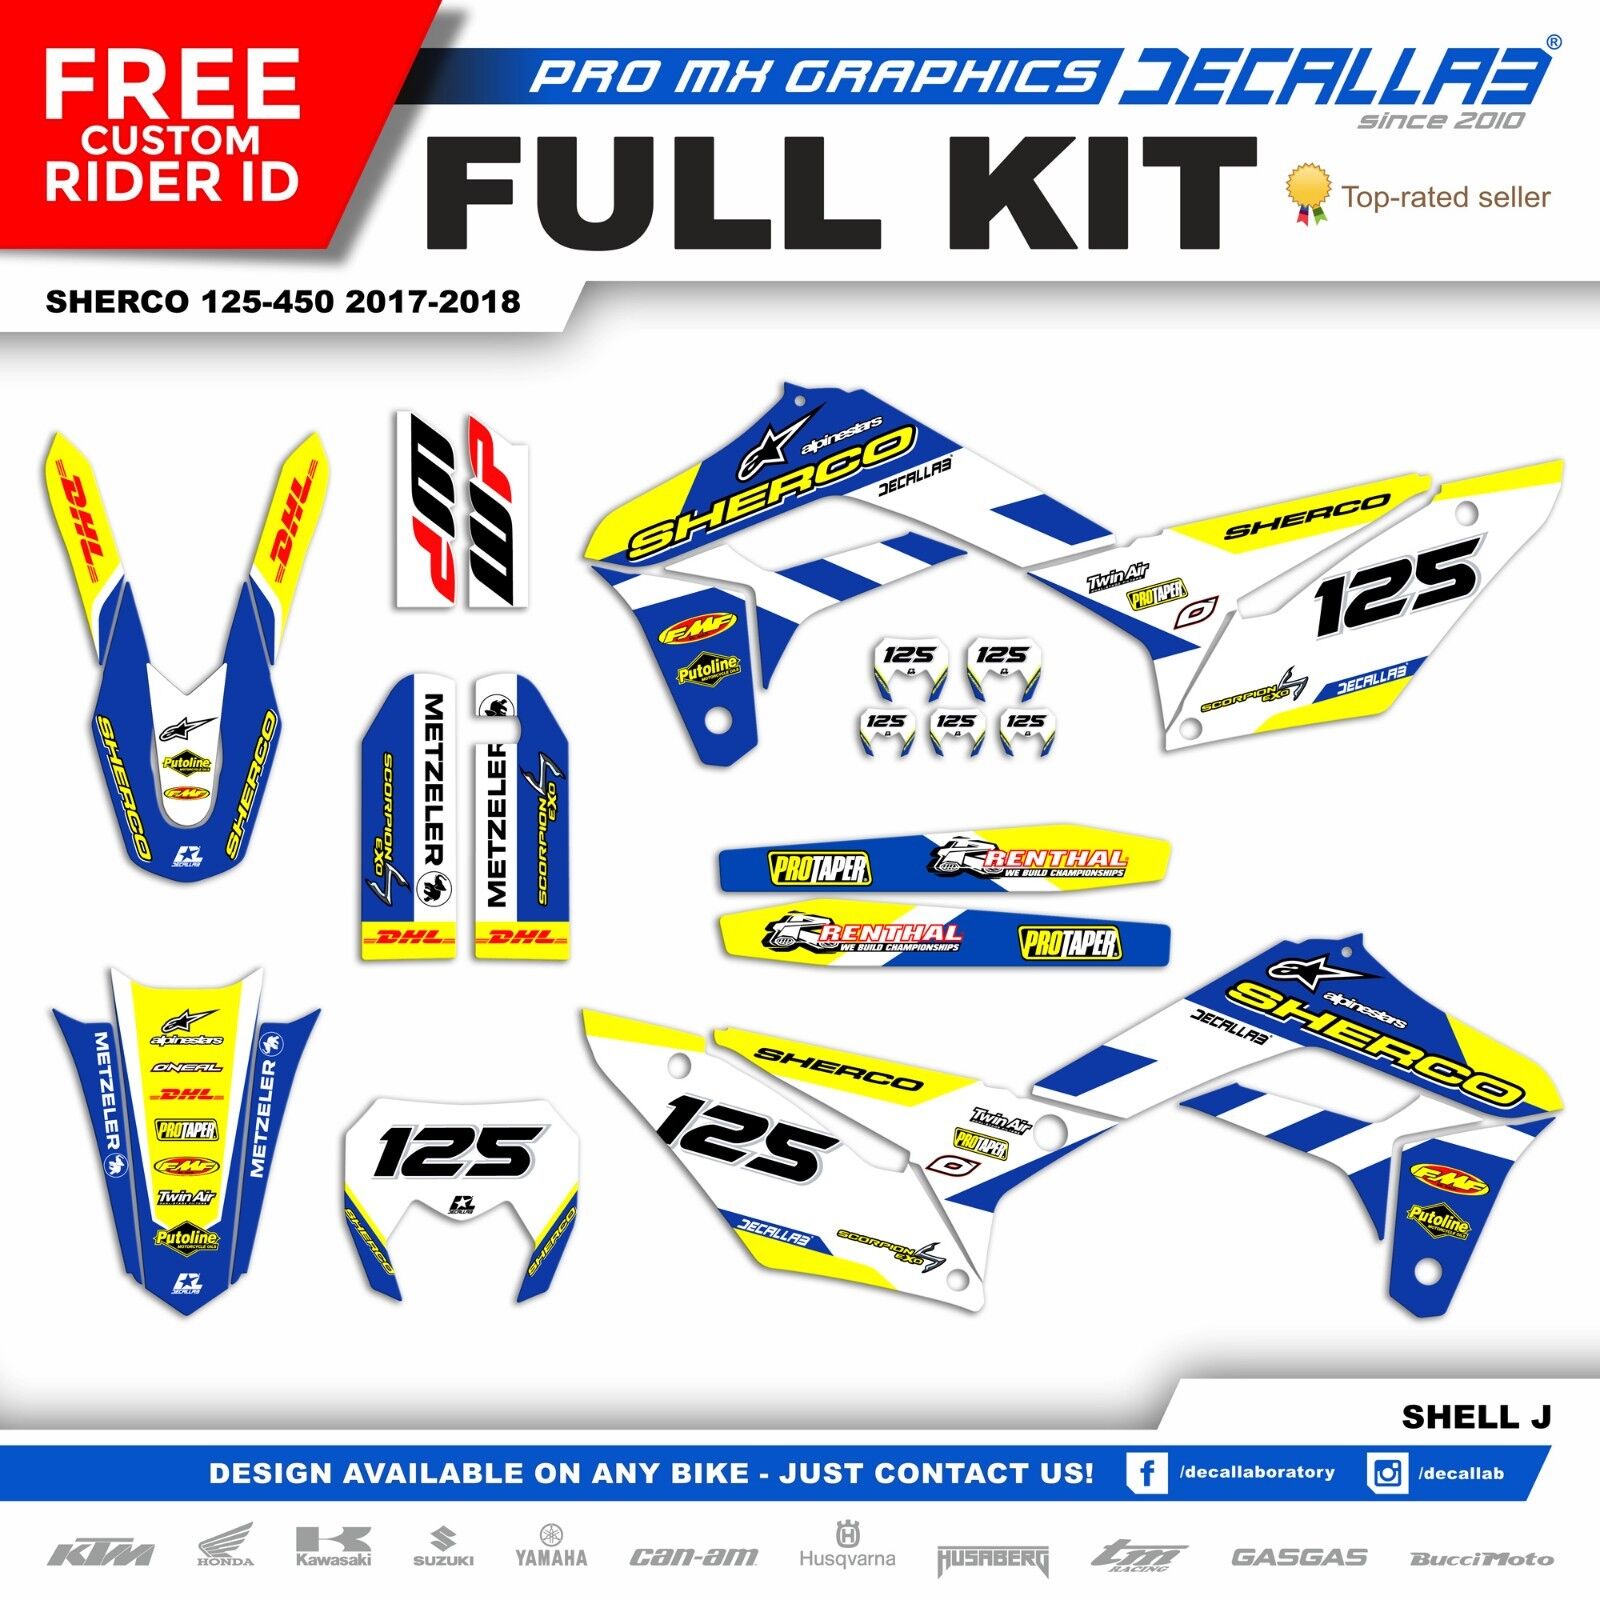 Sherco  2017 2018 ENDURO Super durable MX Graphics Decals Stickers Decallab